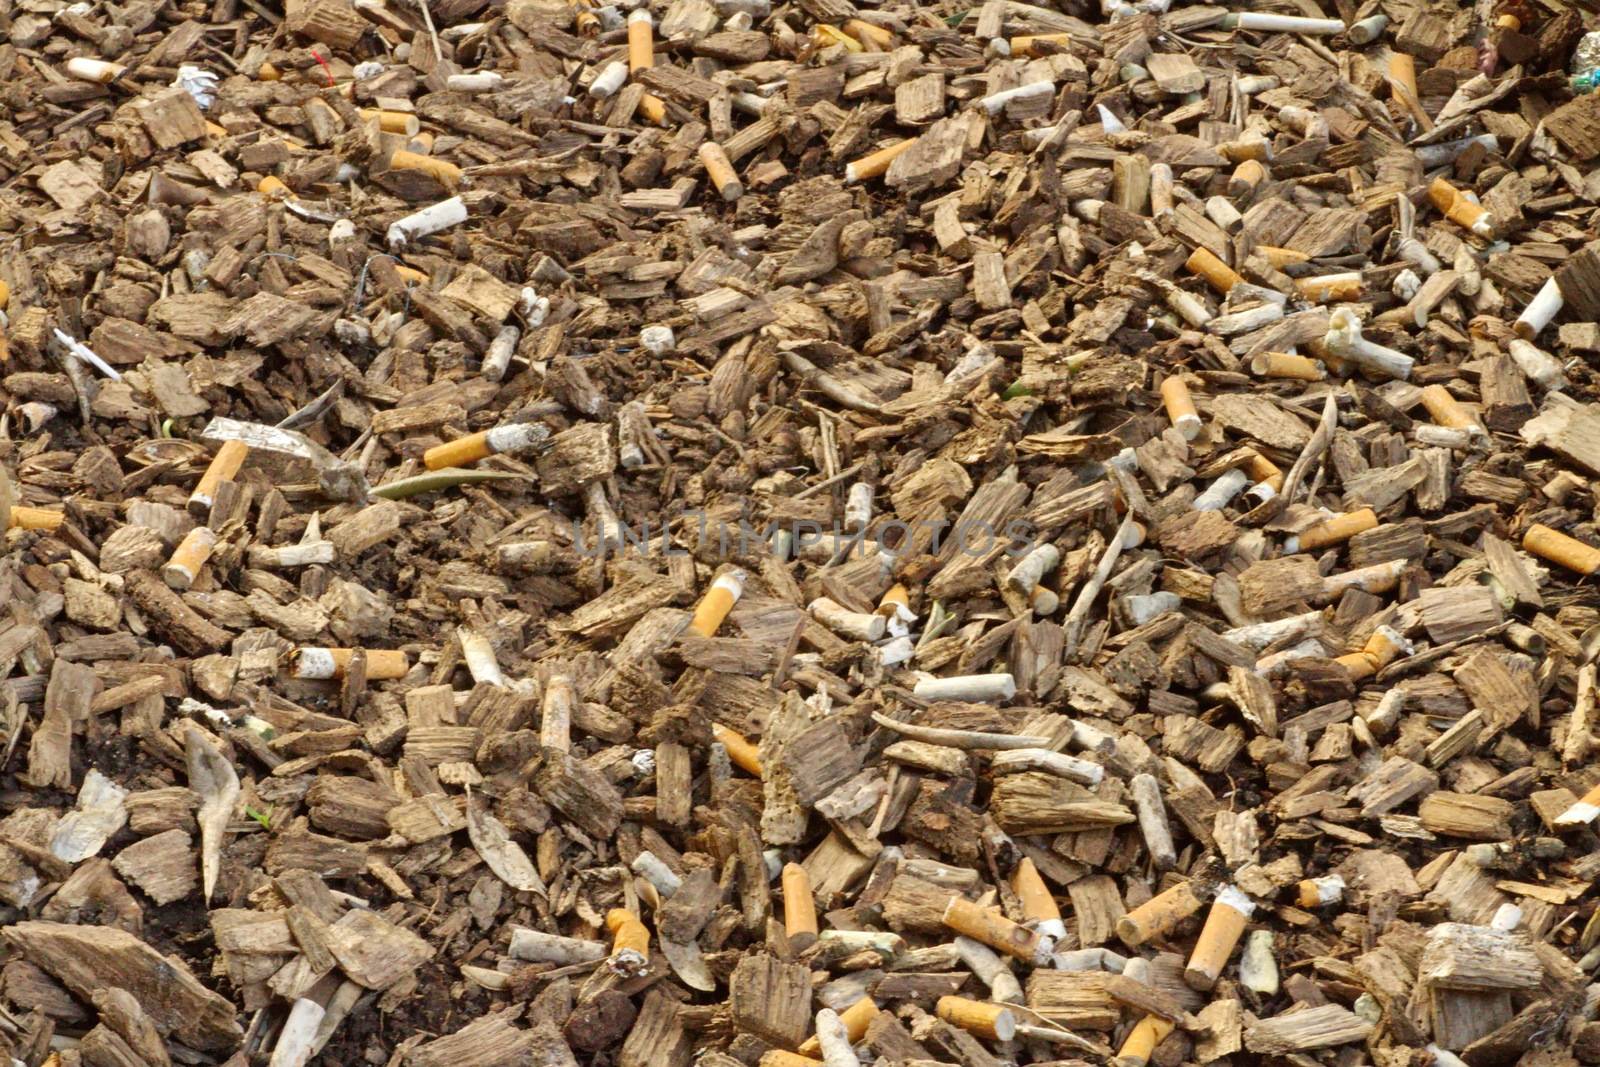 Many cigarette butts among lots of wood chip